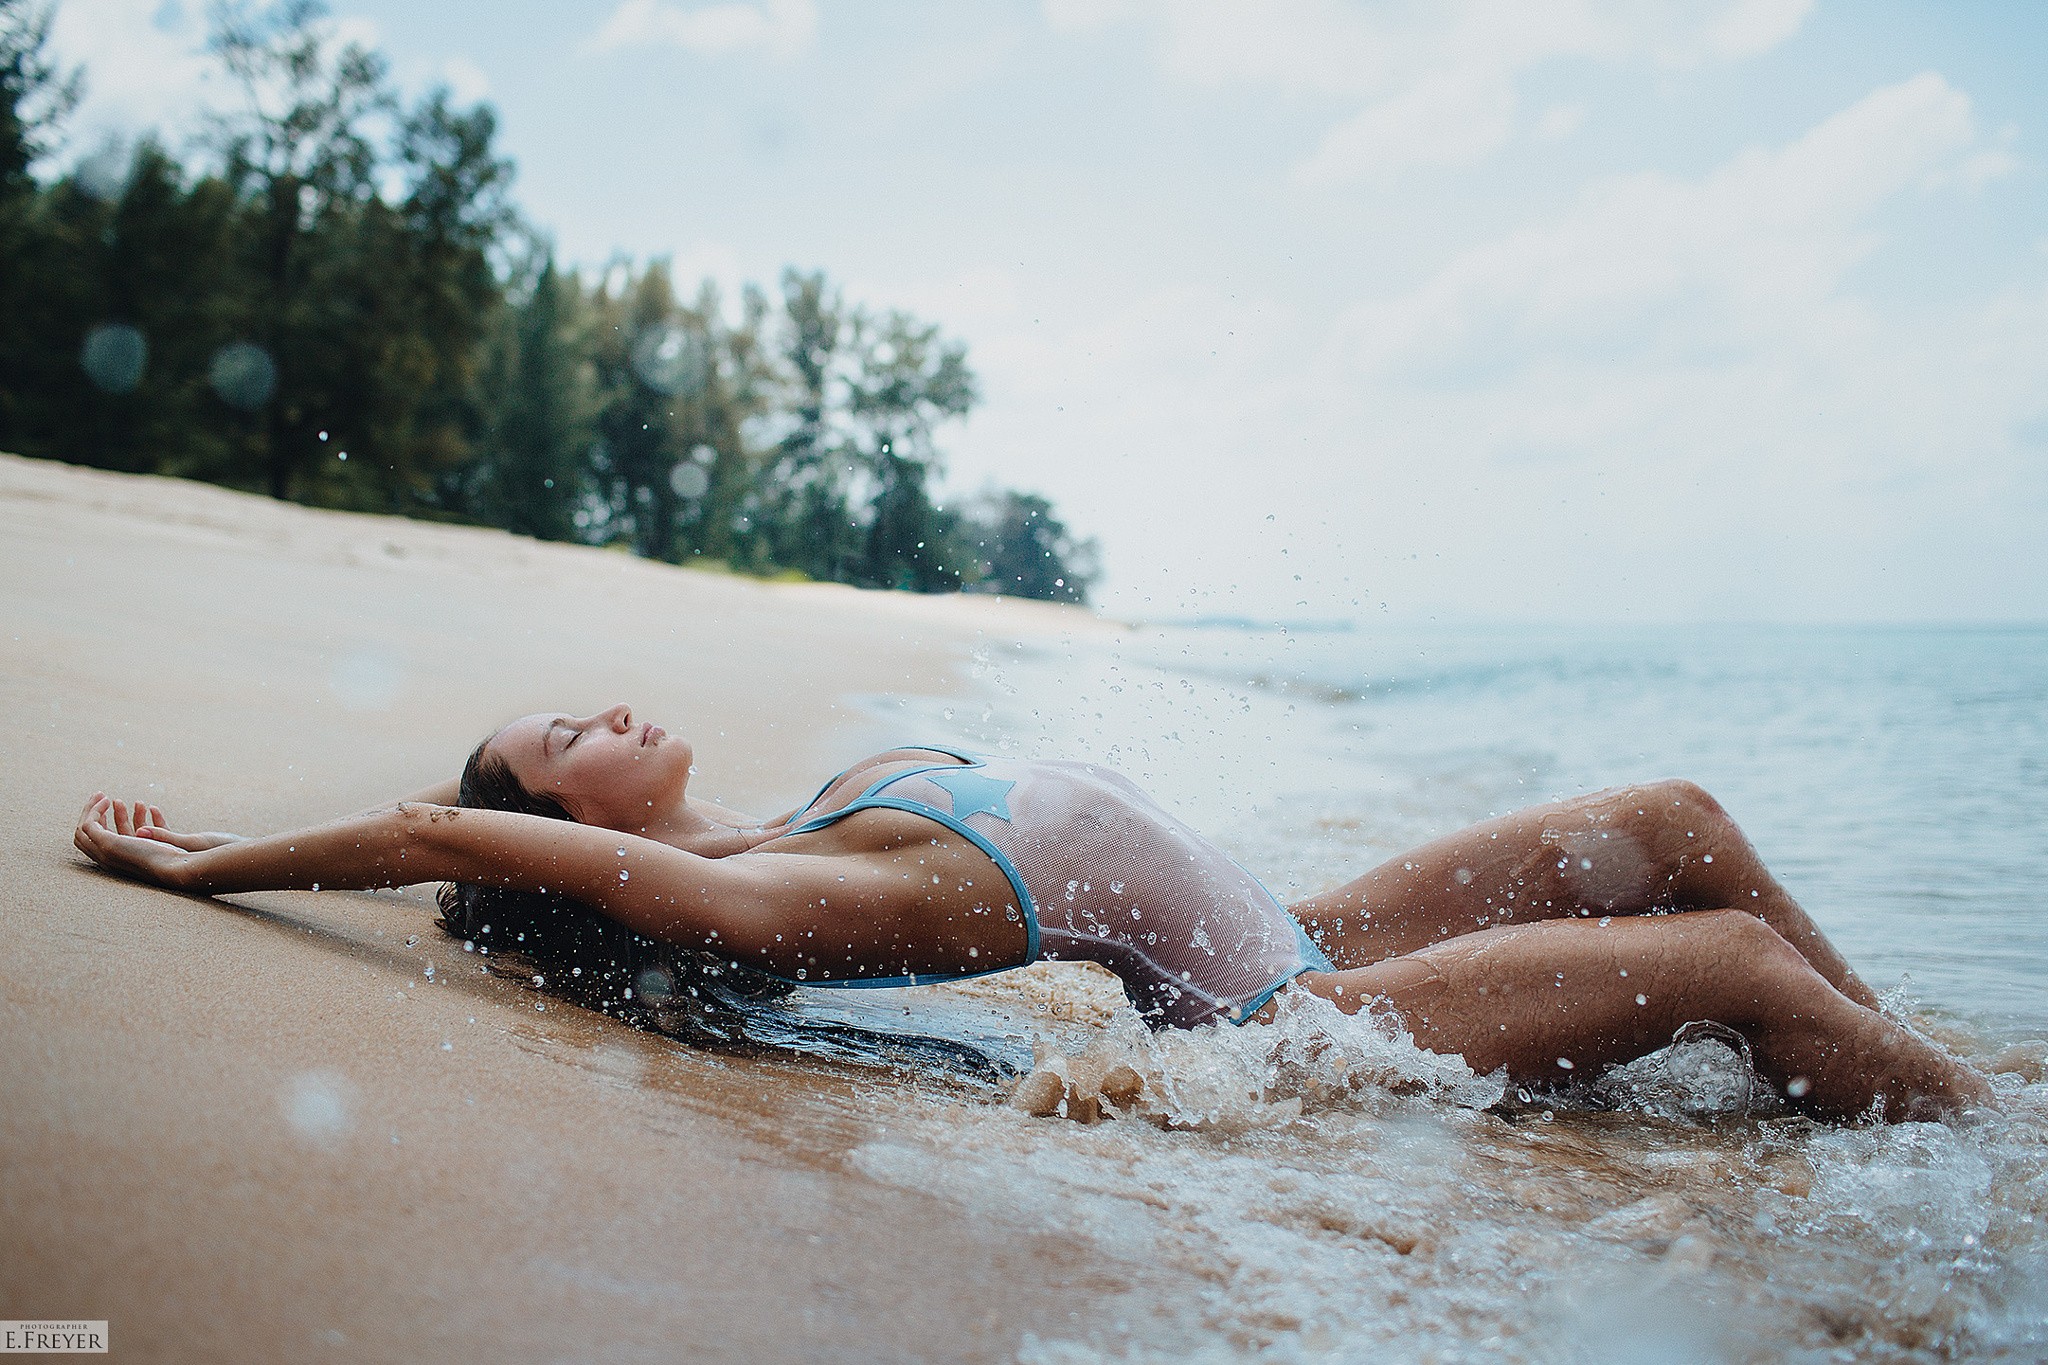 People 2048x1365 women one-piece swimsuit closed eyes water sand wet hair wet body wet clothing arched back armpits water drops sea Evgeny Freyer women outdoors women on beach swimwear boobs wet watermarked beach